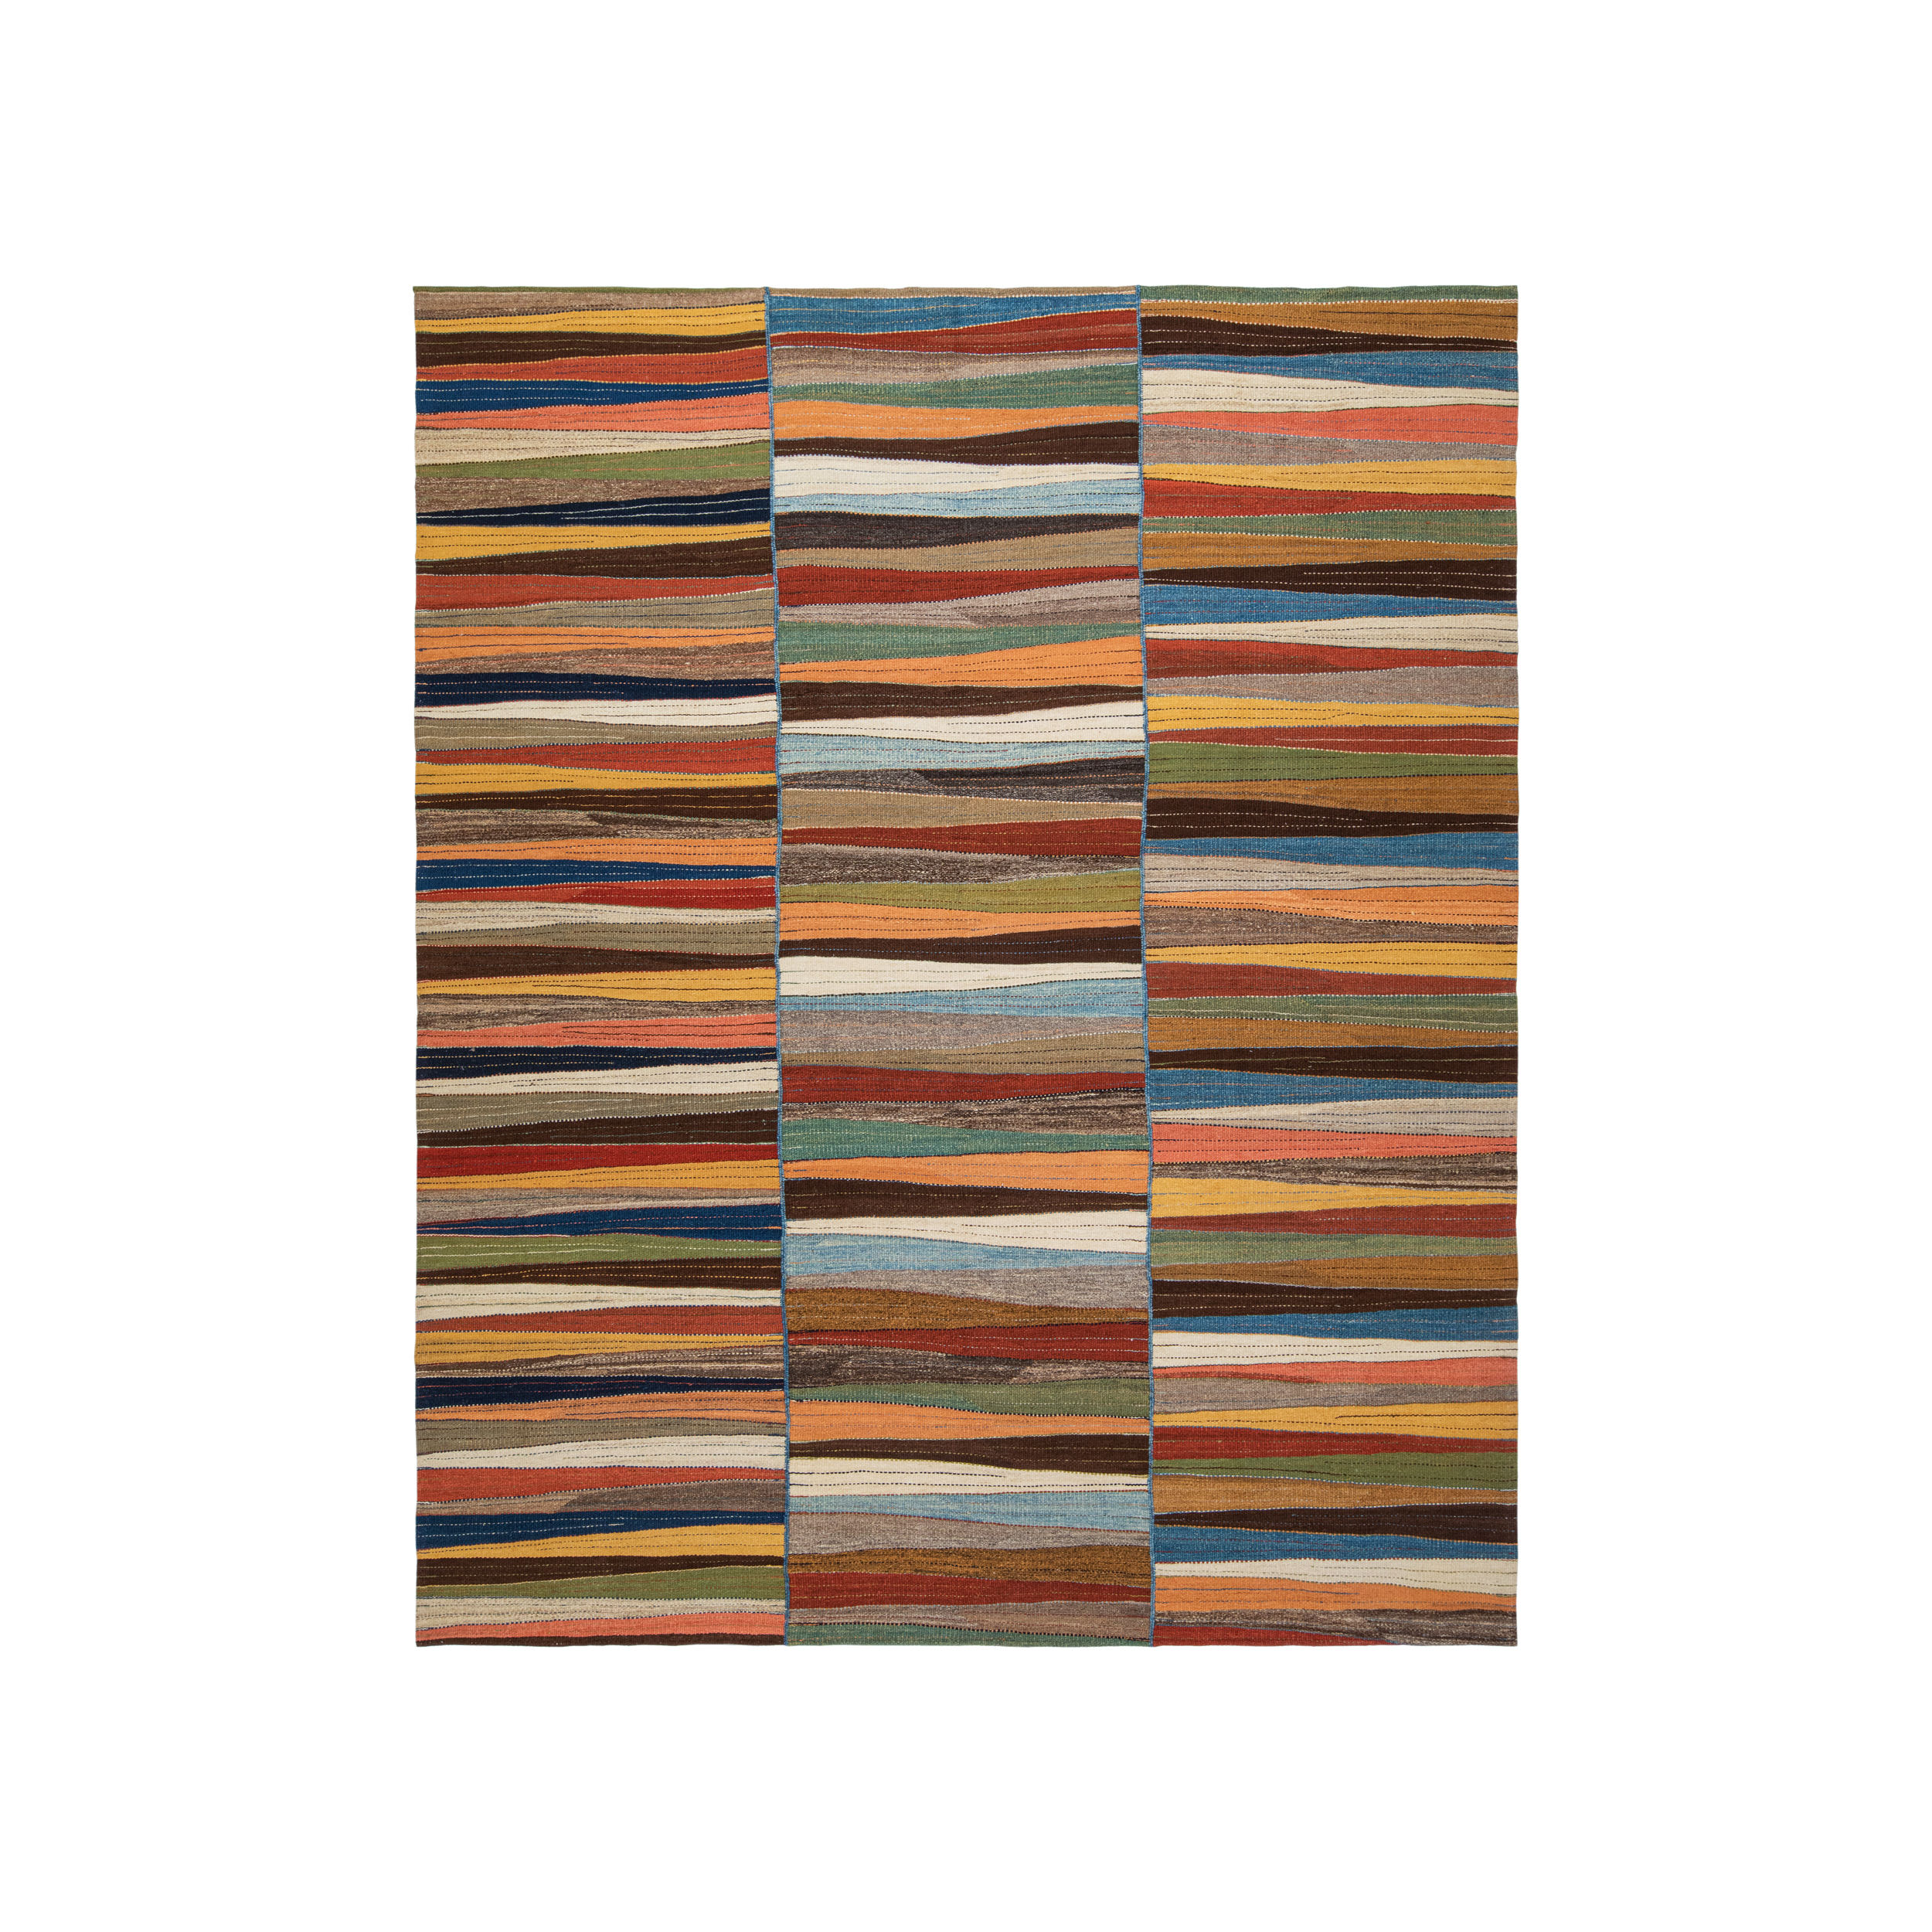 This Mazandaran rug is hand-woven and crafted with 100% wool.